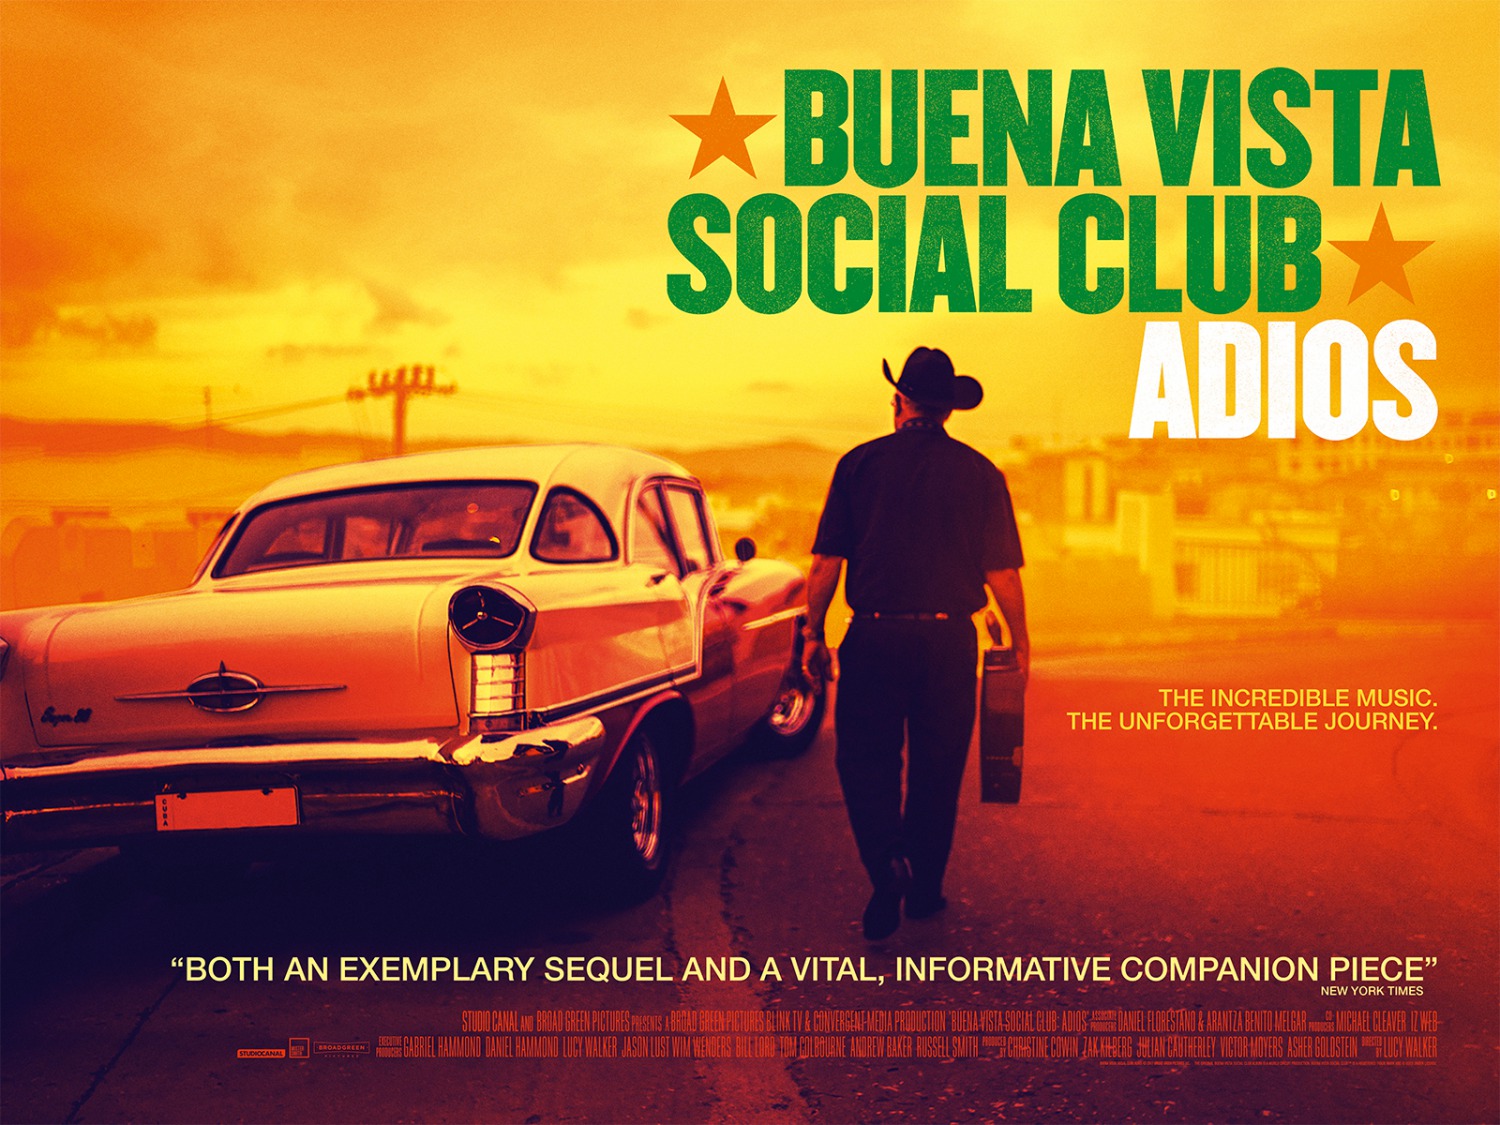 Extra Large Movie Poster Image for Buena Vista Social Club: Adios (#2 of 2)